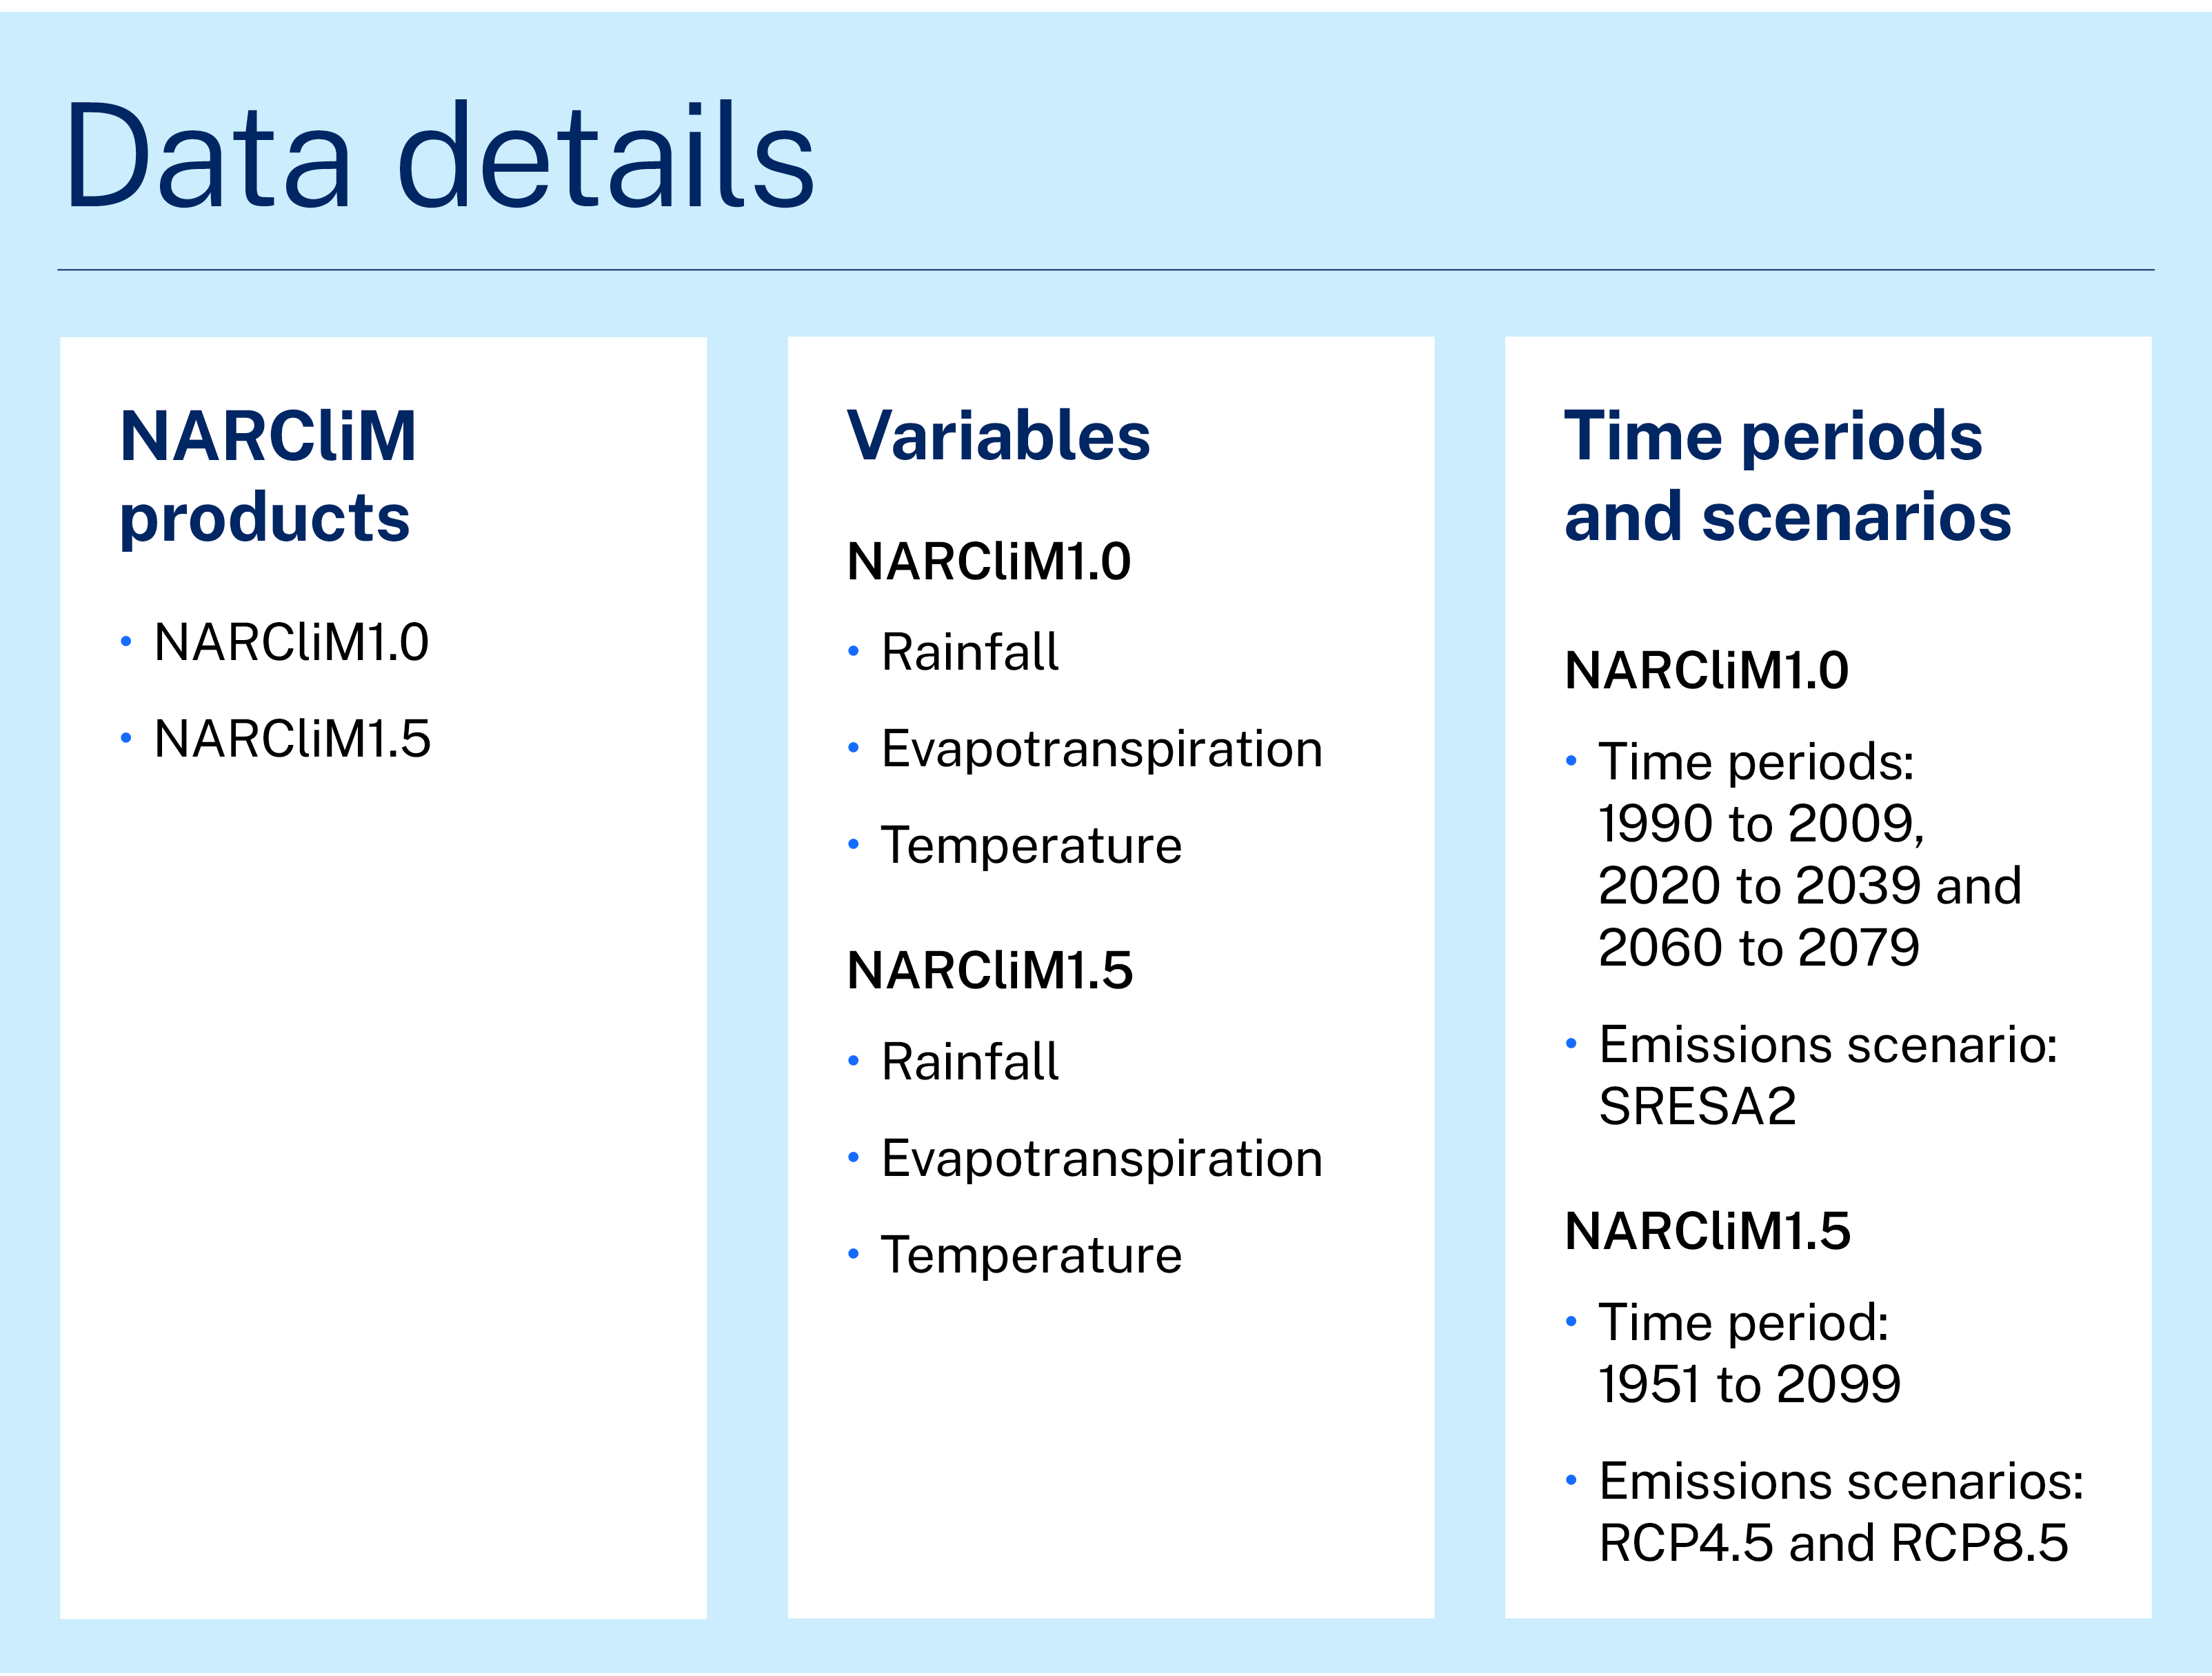 Information graphic. Overview of the data details of the project featured in the case study. One. Narclim products. Narclim 1.0 and 1.5. Two. Varables.Narclim 1.0. Rainfall, evapotranspiration and temperature. Narclim 1.5. Rainfall, evapotranspiration and temperature. Time periods and scenarios. Narclim 1.0. TIme periods: 1990 to 2009, 2020 to 2030 and 2060 to 2079. Emissions scenario: SRESA2. Narclim 1.5. Time period. 1951 to 2099. Emissions scenarios: RCP4.5 and RCP8.5. 